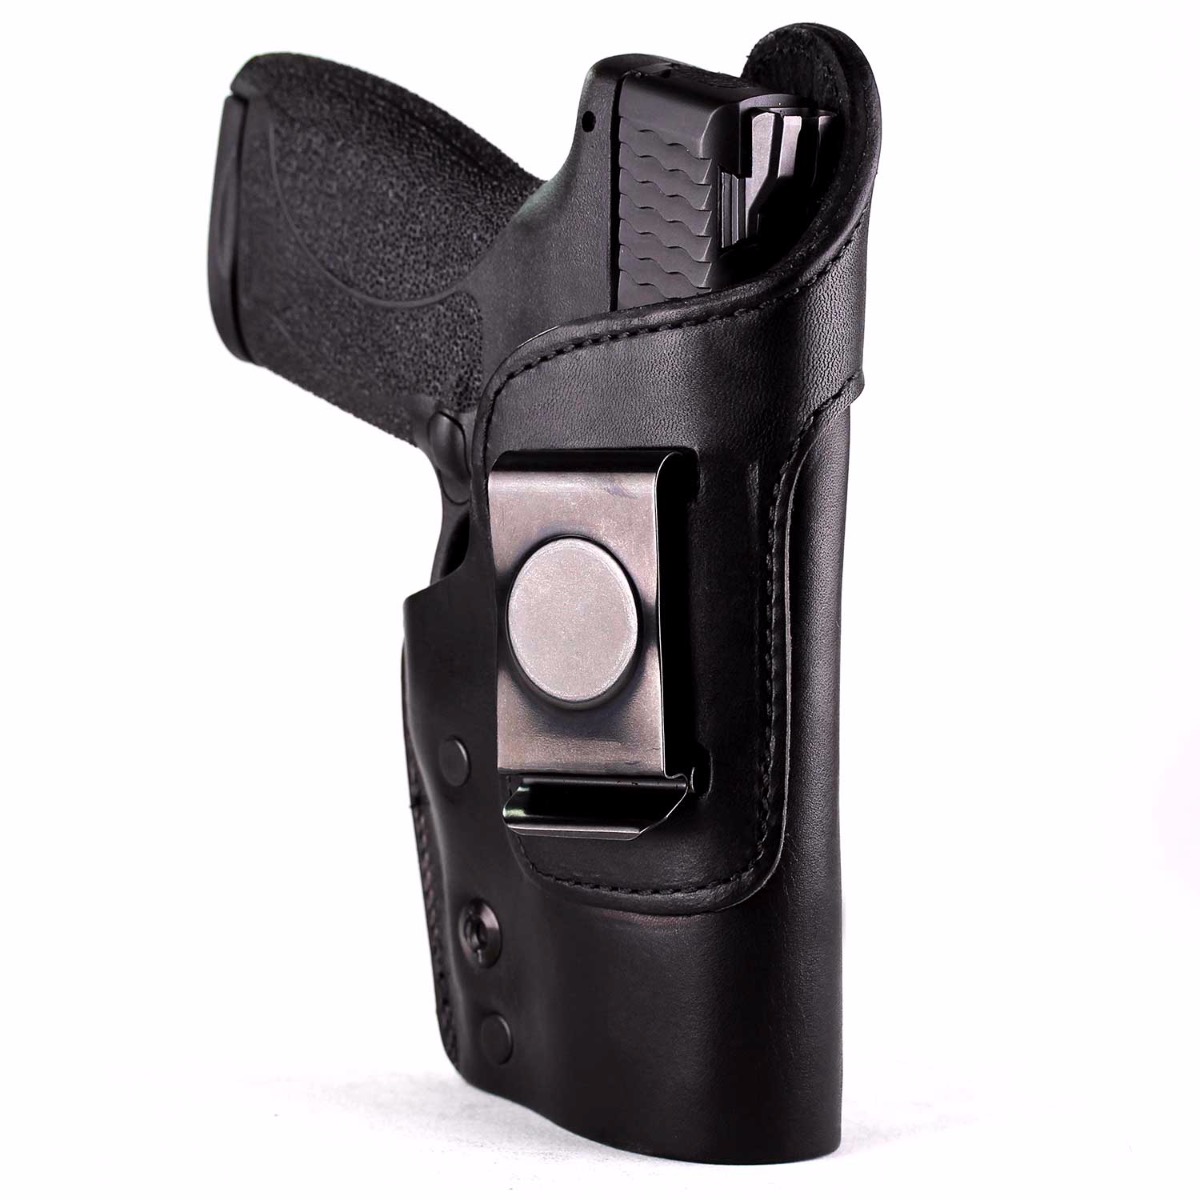 Professional CZ 75 D Compact P-01 P-06 PCR Holster with Automatic Safety Lock 